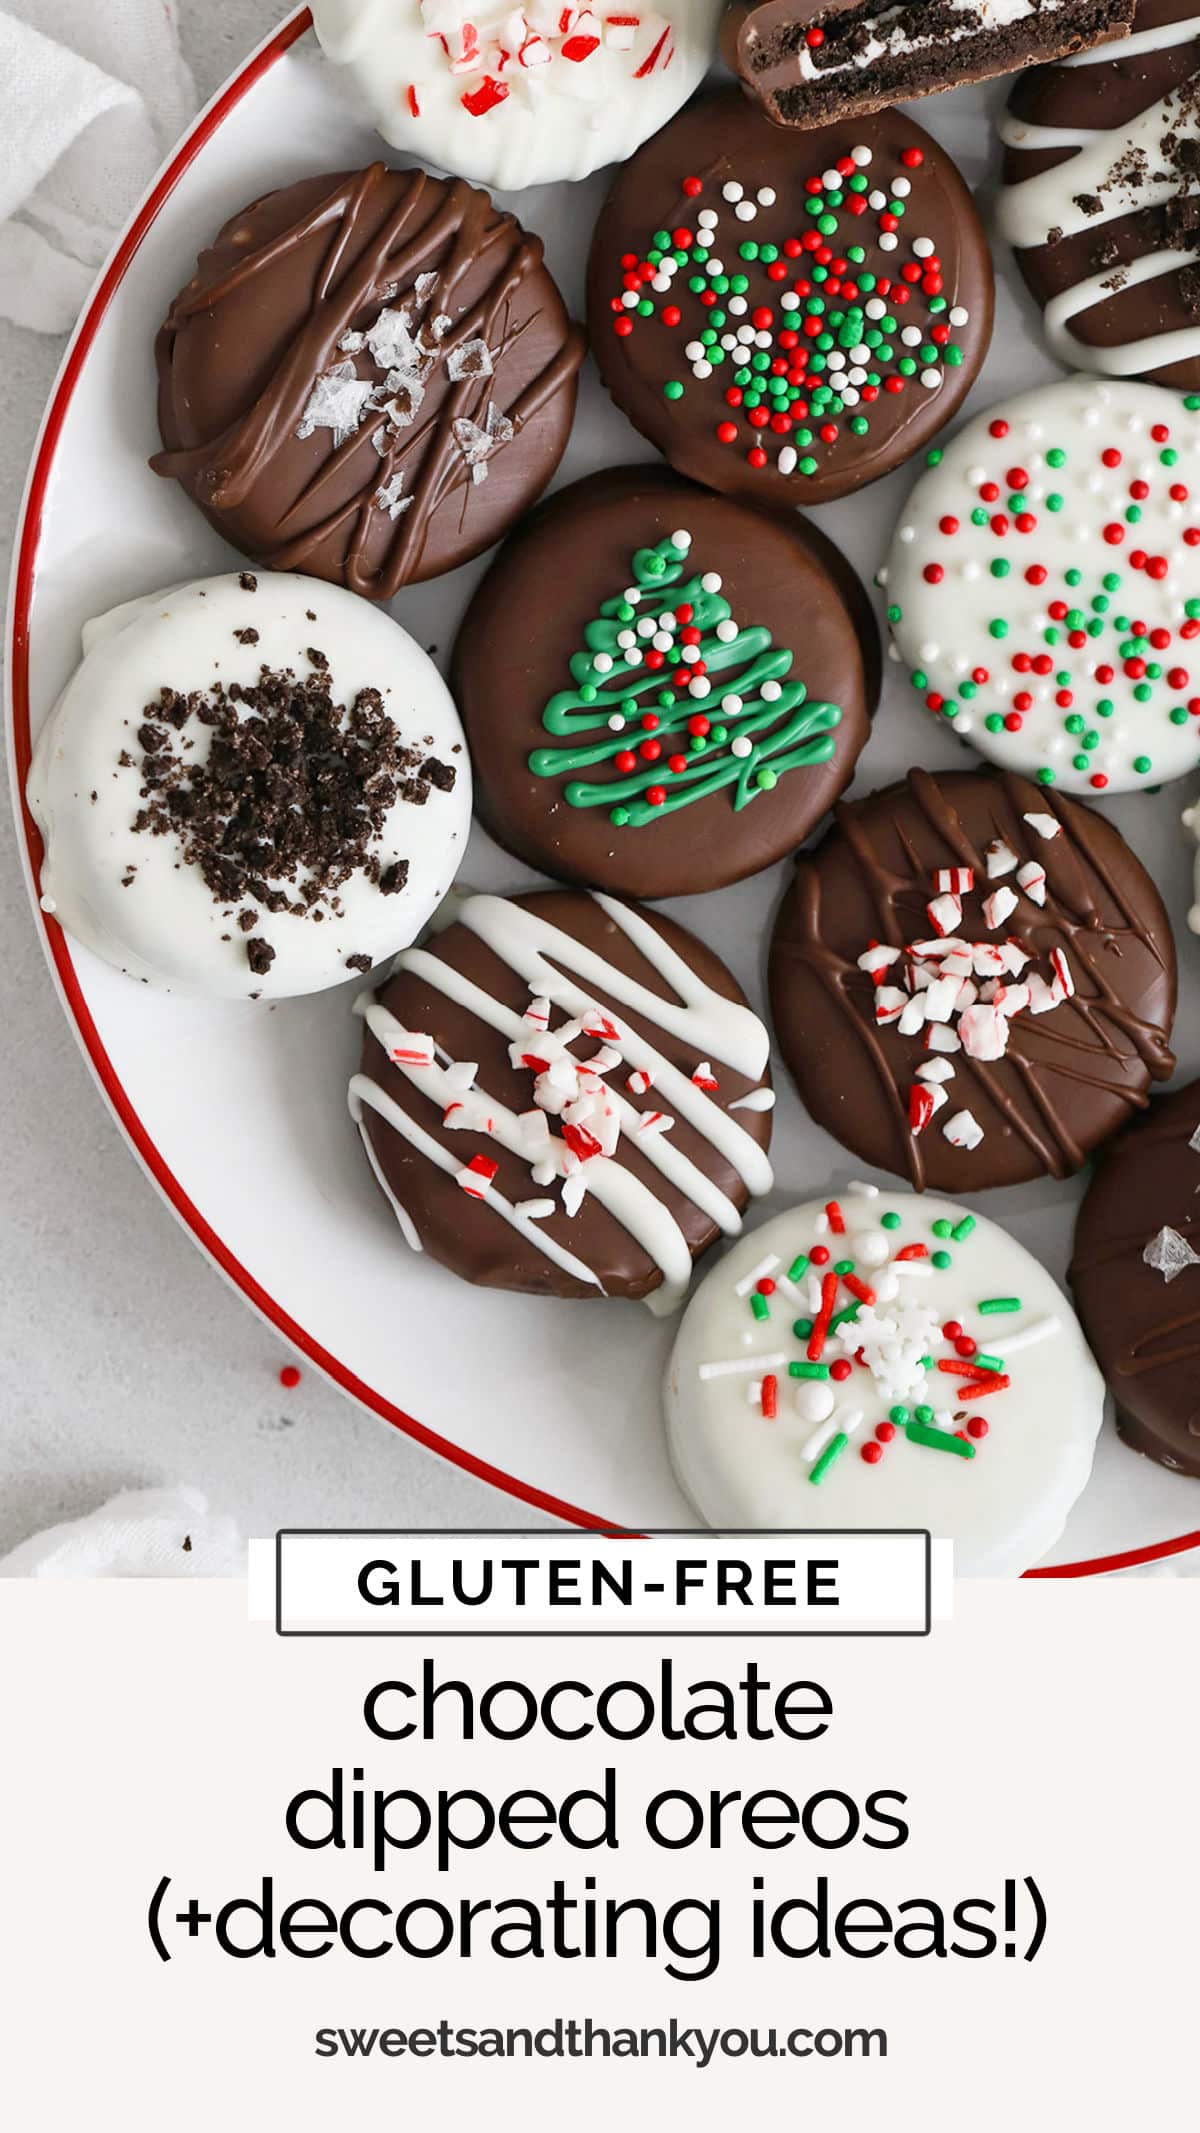 These easy (gluten-free!) chocolate covered Oreos are a fun no-bake holiday treat everyone LOVES! (Don't miss all our cute decorating ideas!) These easy chocolate dipped Oreos make such a cute addition to holiday treat plates or cookie exchanges. They're the perfect EASY holiday recipe to try this year!